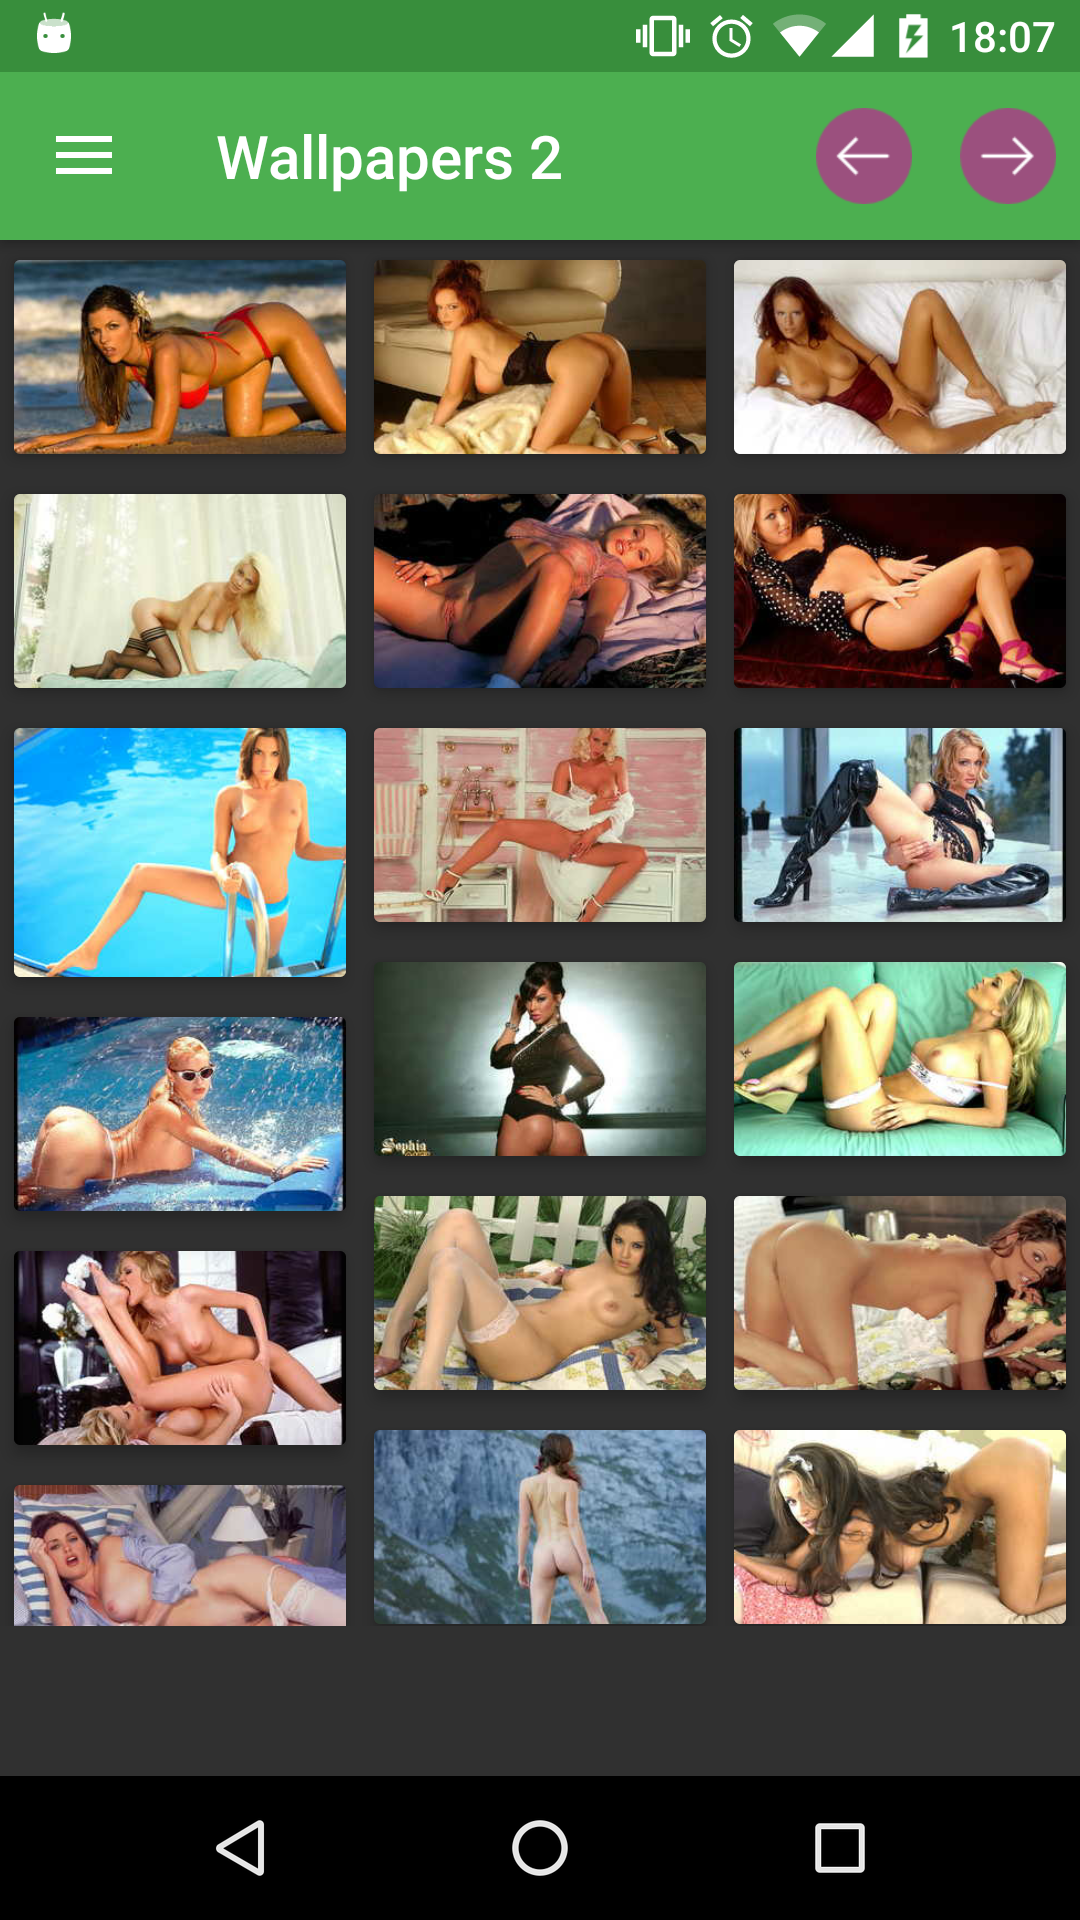 Rx Erotic Wallpapers collection,downloads,pornstar,erotic,picd,download,pics,nhentai,image,pic,apps,porn,hentei,hentai,star,sexy,pornstarphoto,backgrounds,wallpapers,apk